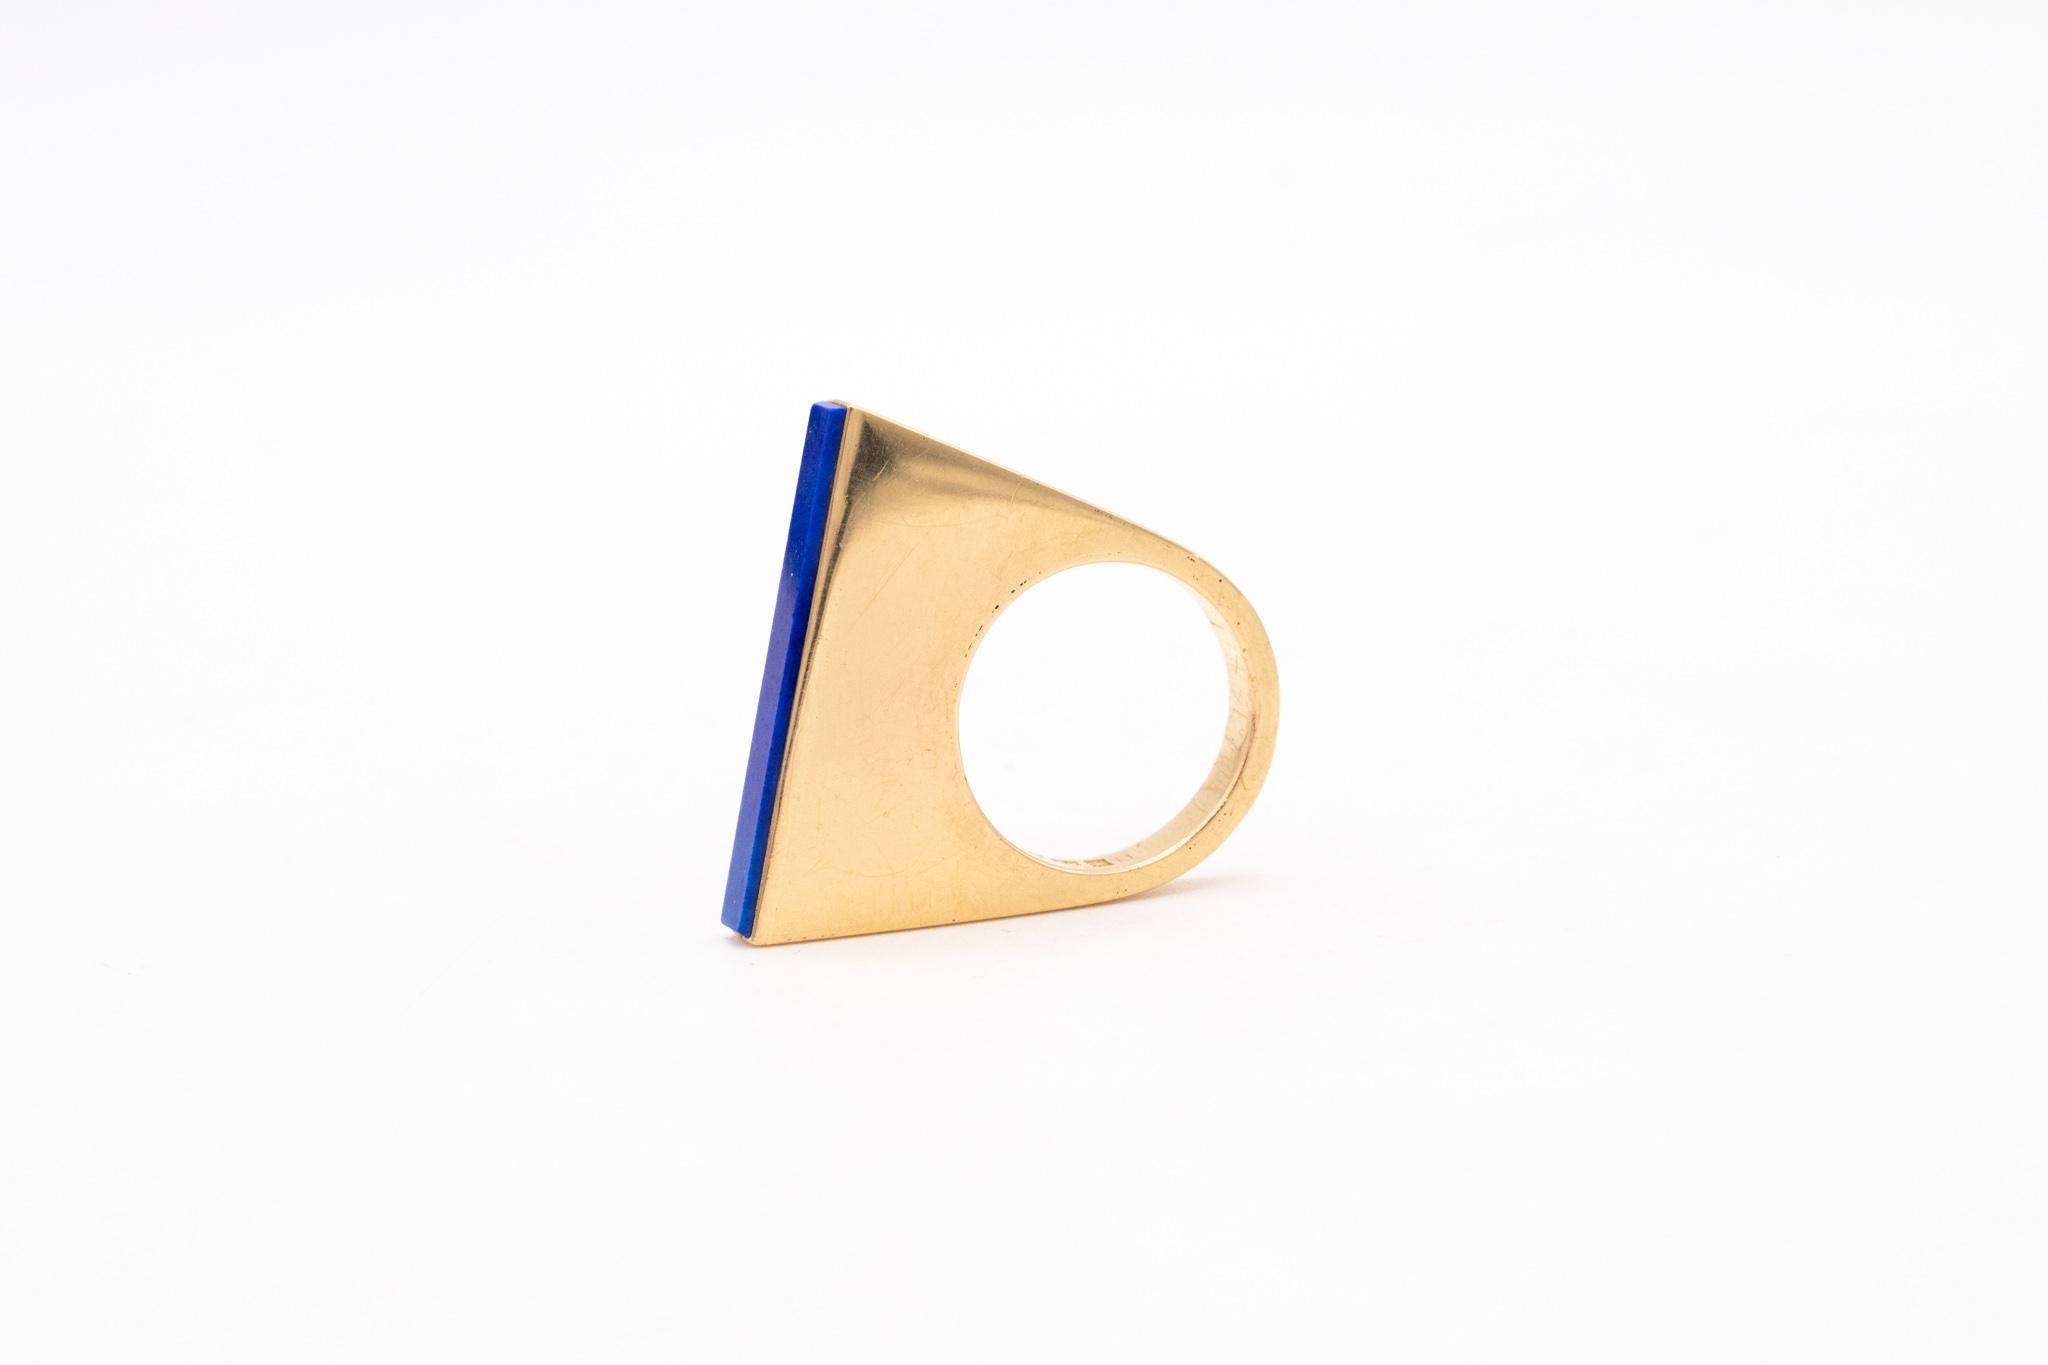 Women's Sigurd Persson 1972 Sweden Geometric Sculptural Ring 18Kt Gold and Lapis Lazuli